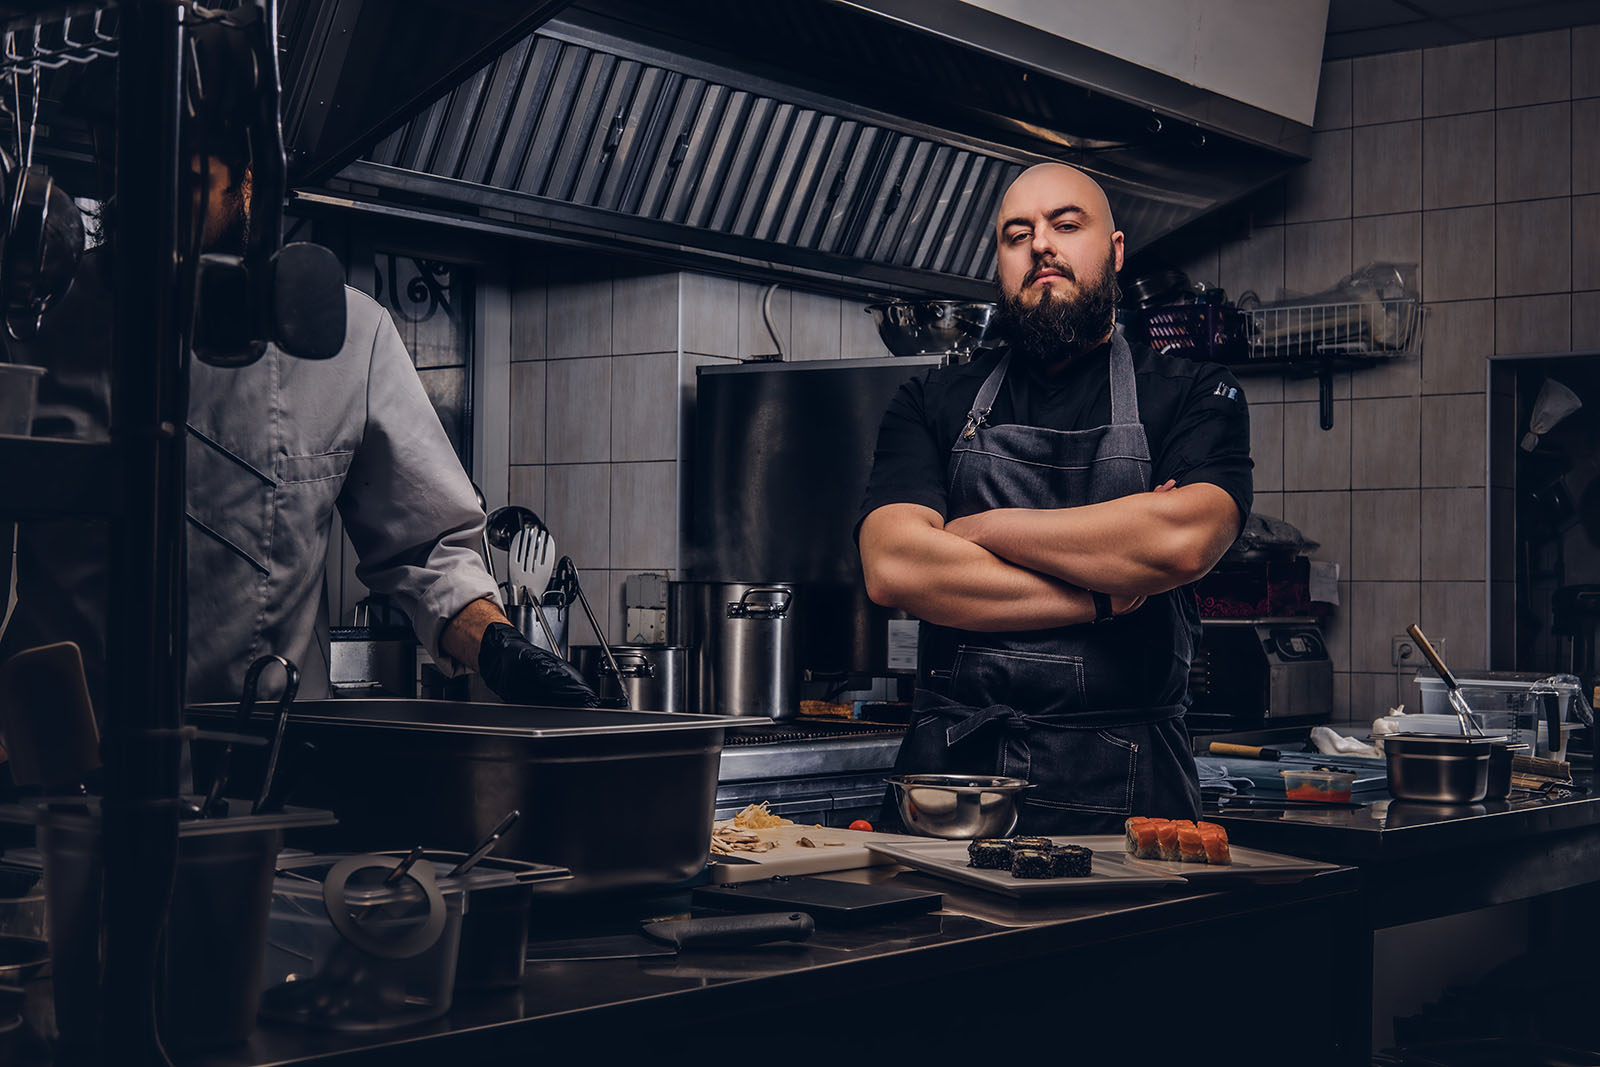 Two bearded cooks dressed in uniforms preparing sushi in a kitchen.